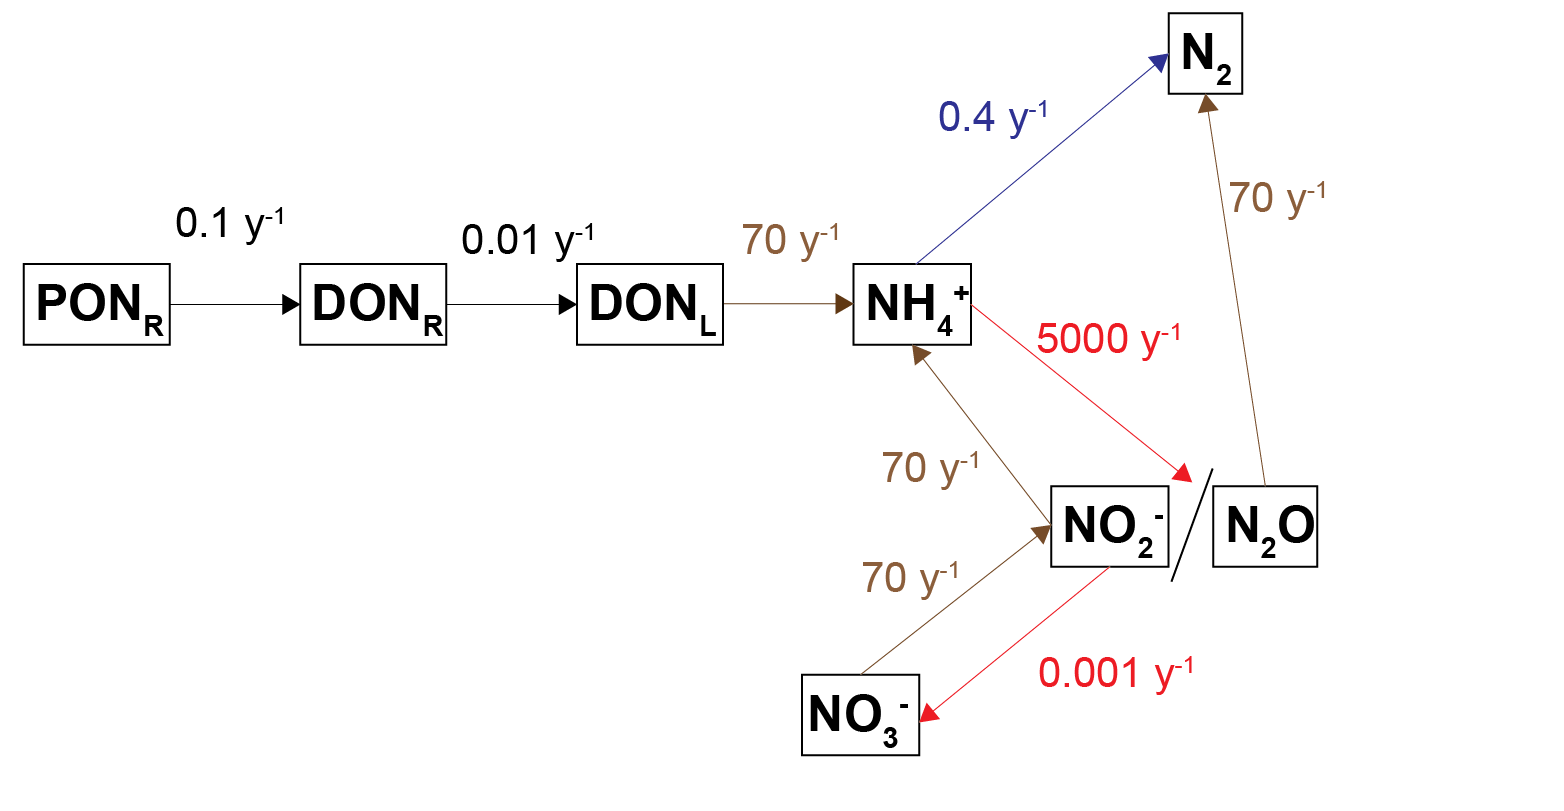 Diagram of the processes of nitrogen breakdown with the kinetic rate constants shown for each process.